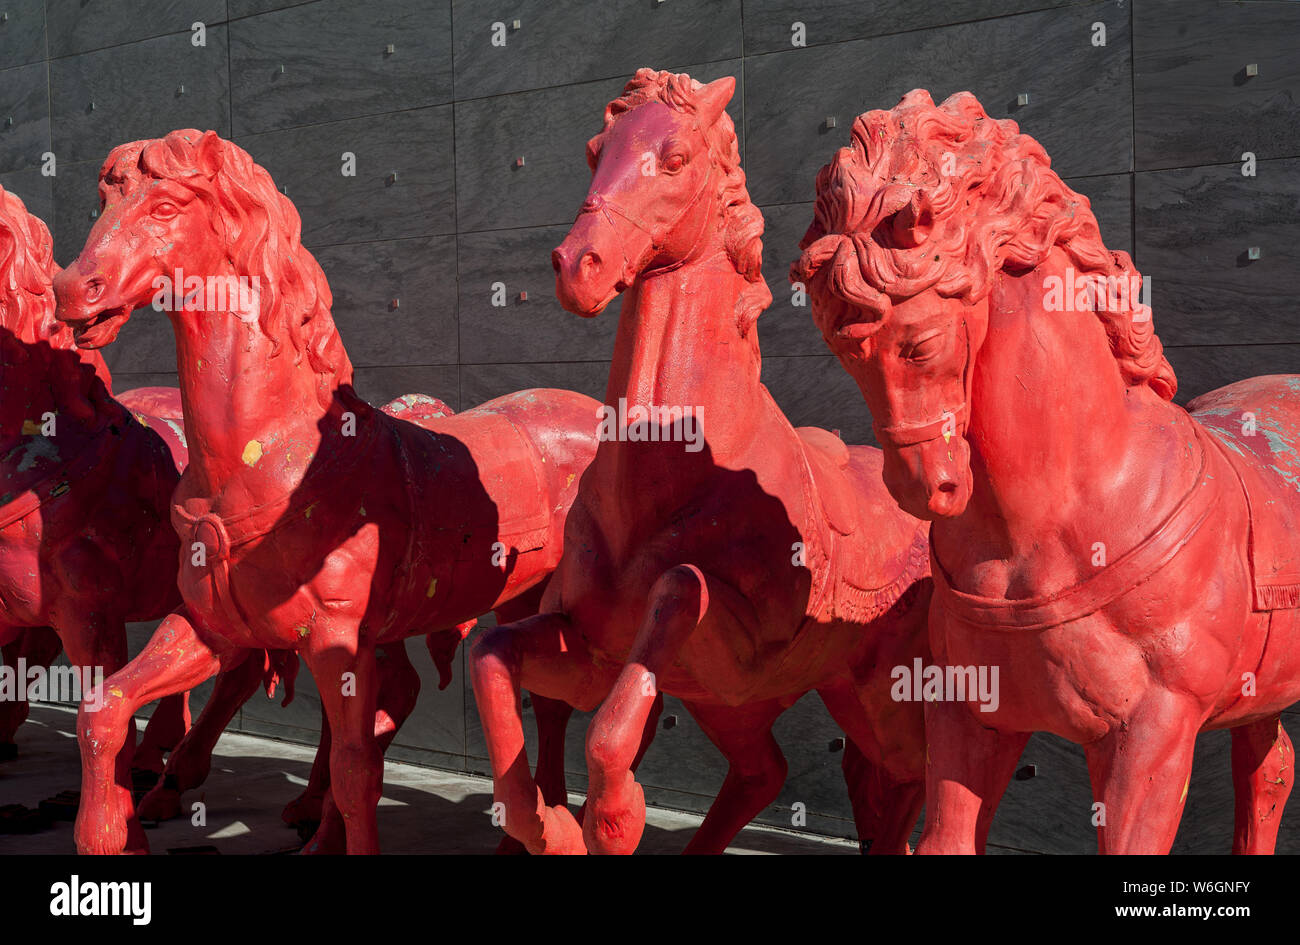 Red horses sculptures, in a row, on gray stones wall background. Stock Photo